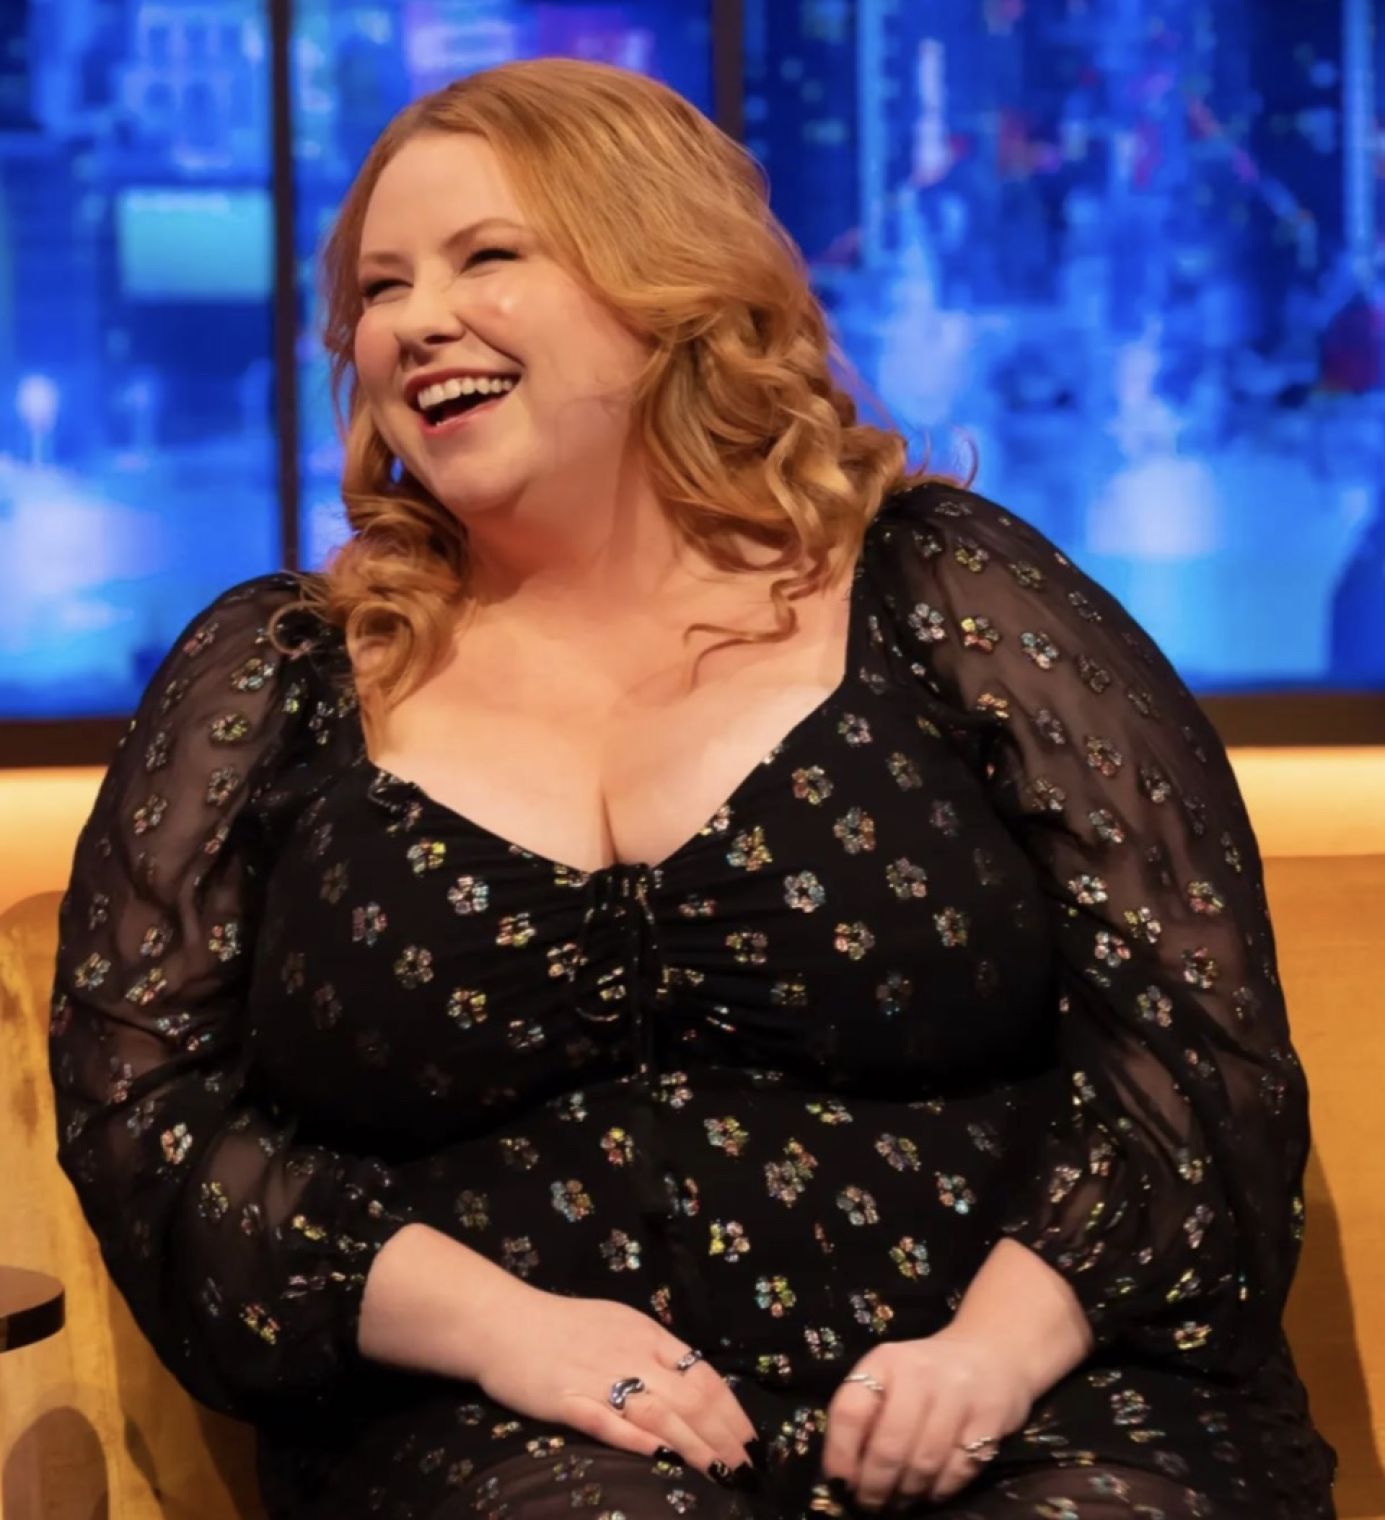 See the hilarious Amy Gledhill on The Jonathan Ross Show on Saturday night